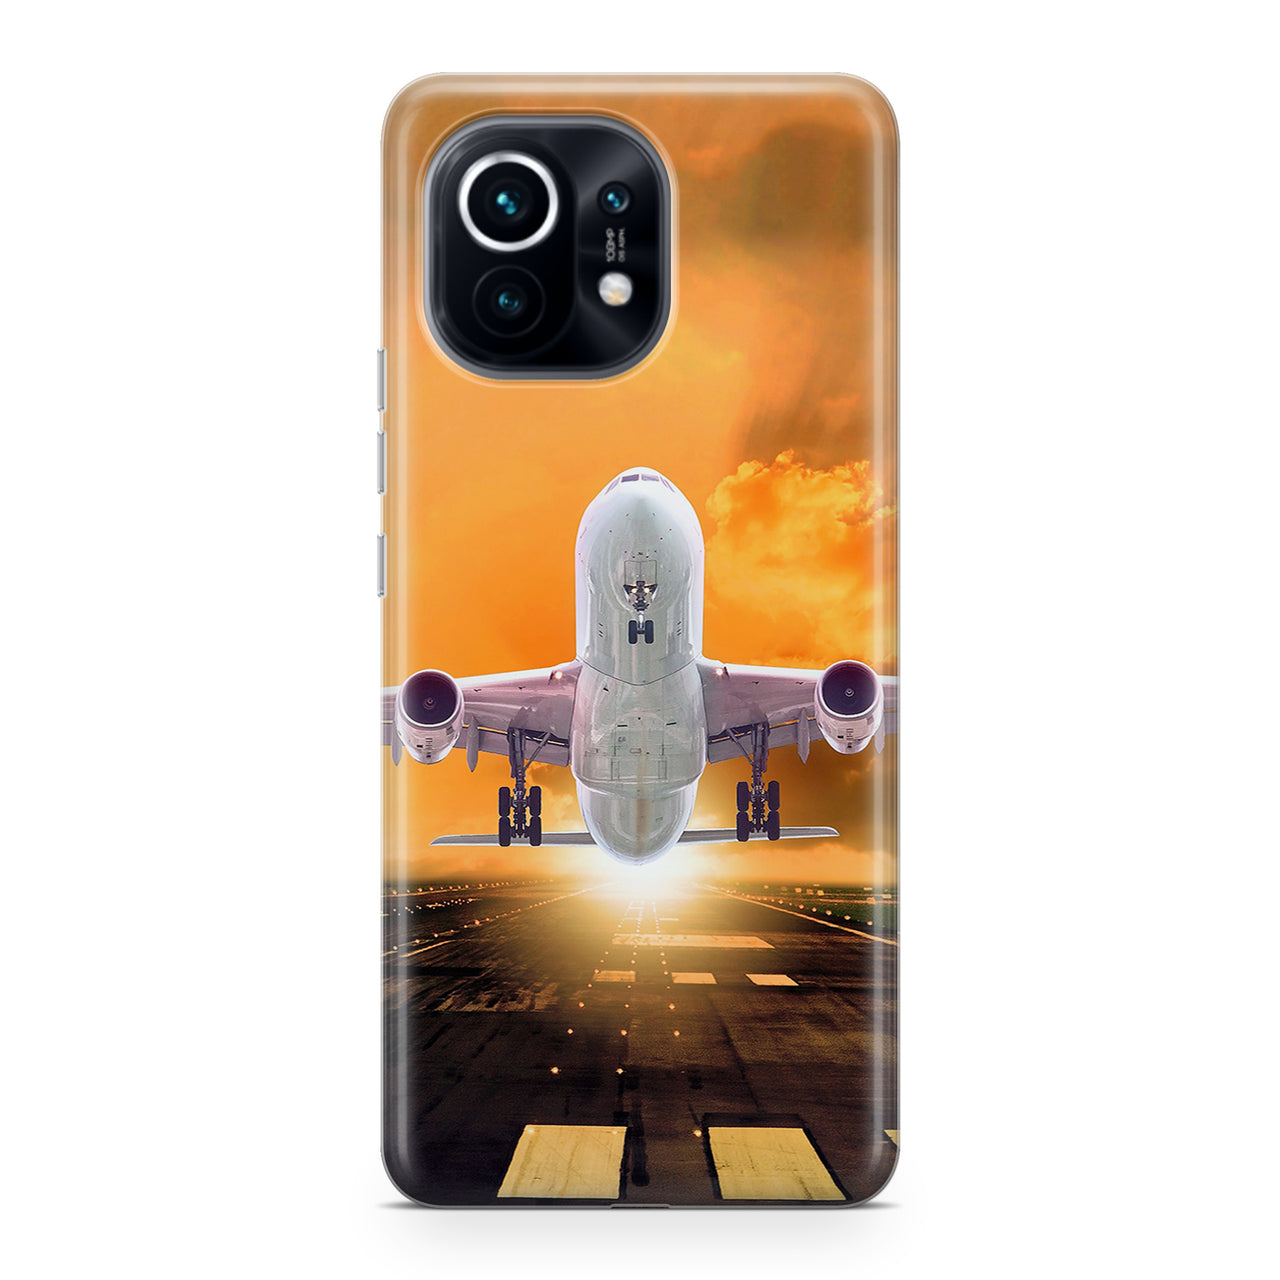 Amazing Departing Aircraft Sunset & Clouds Behind Designed Xiaomi Cases